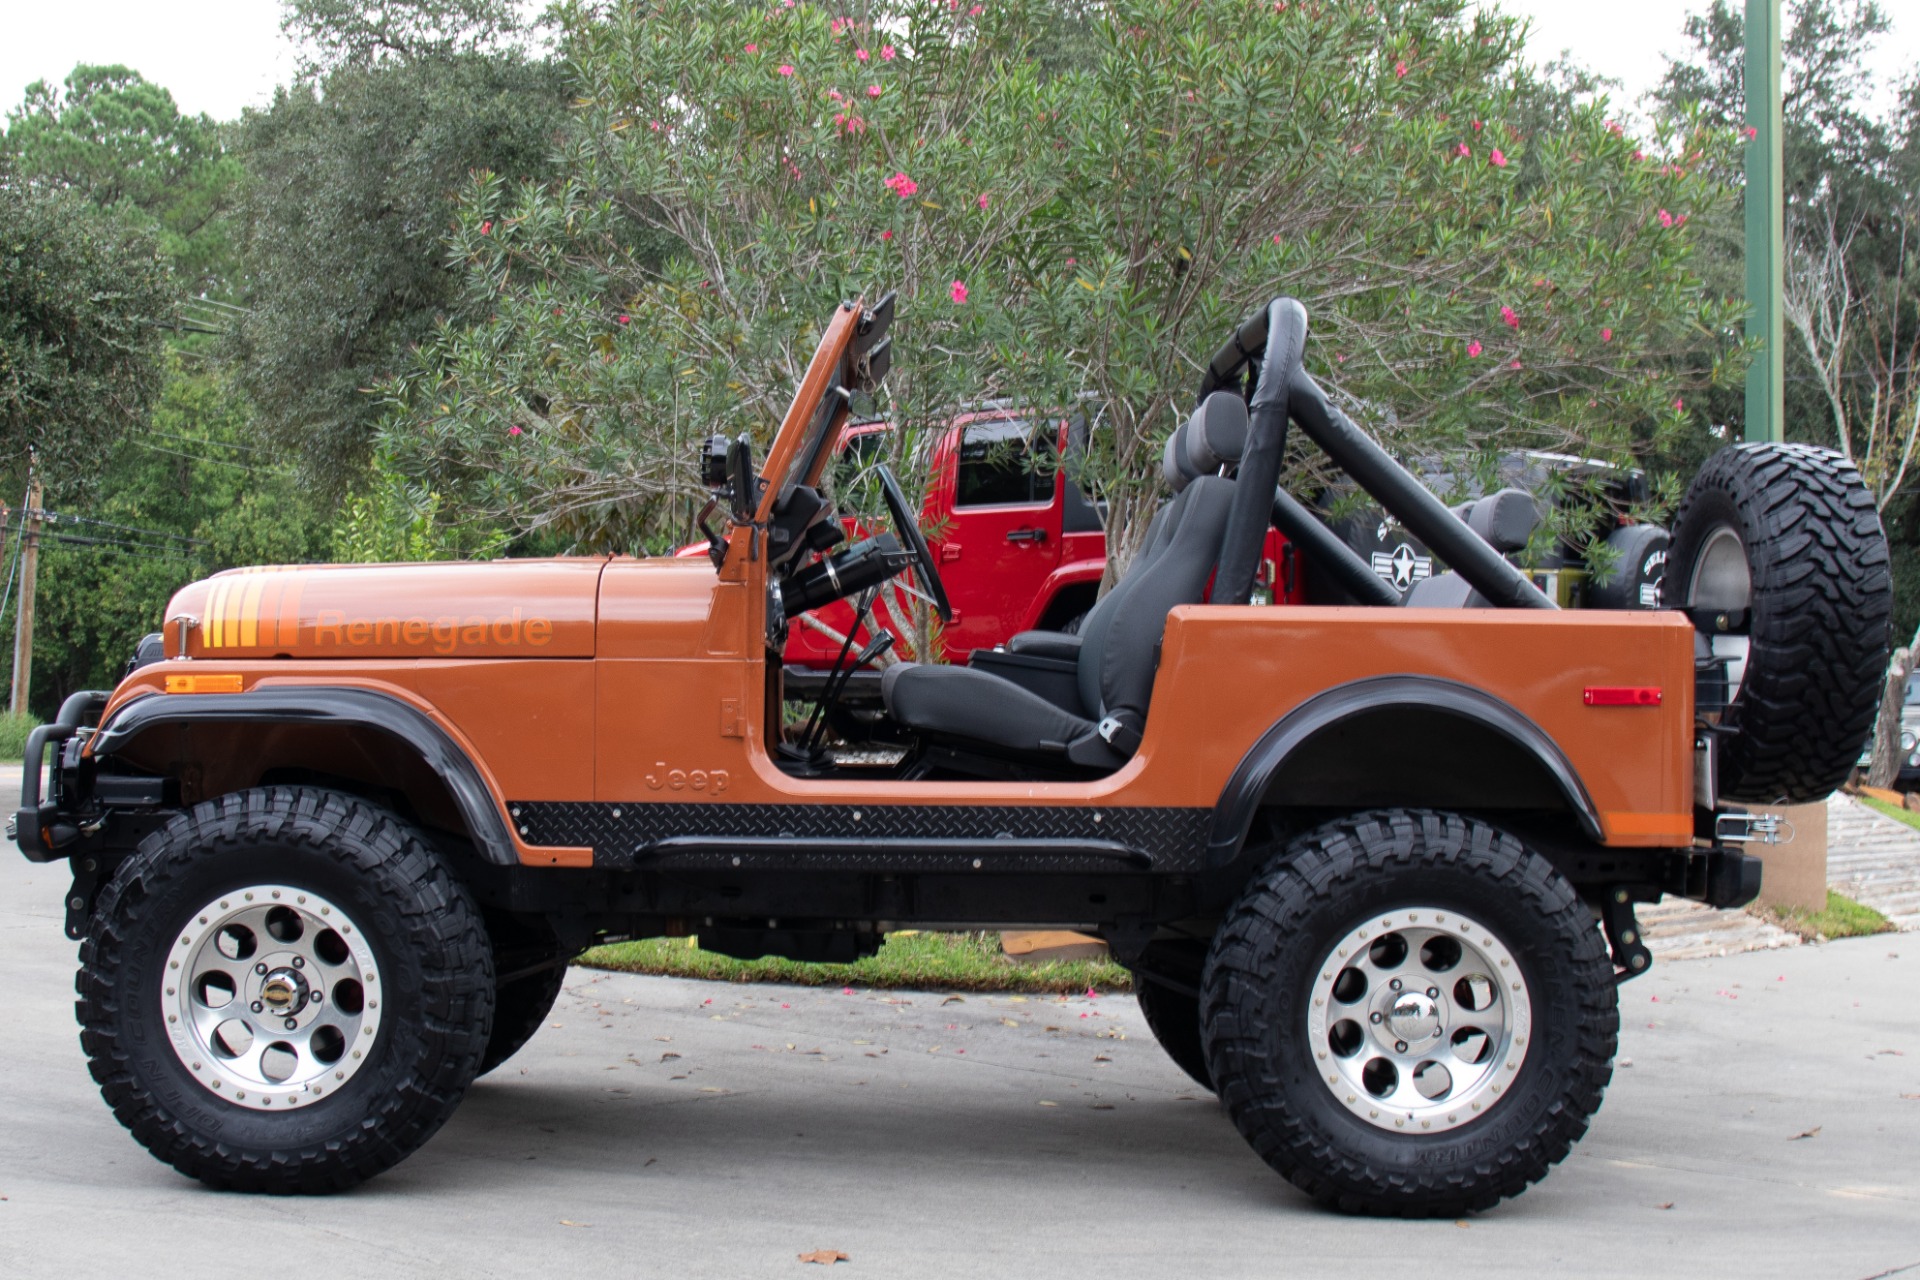 Used 1980 Jeep CJ-7 For Sale ($25,995) | Select Jeeps Inc. Stock #722736